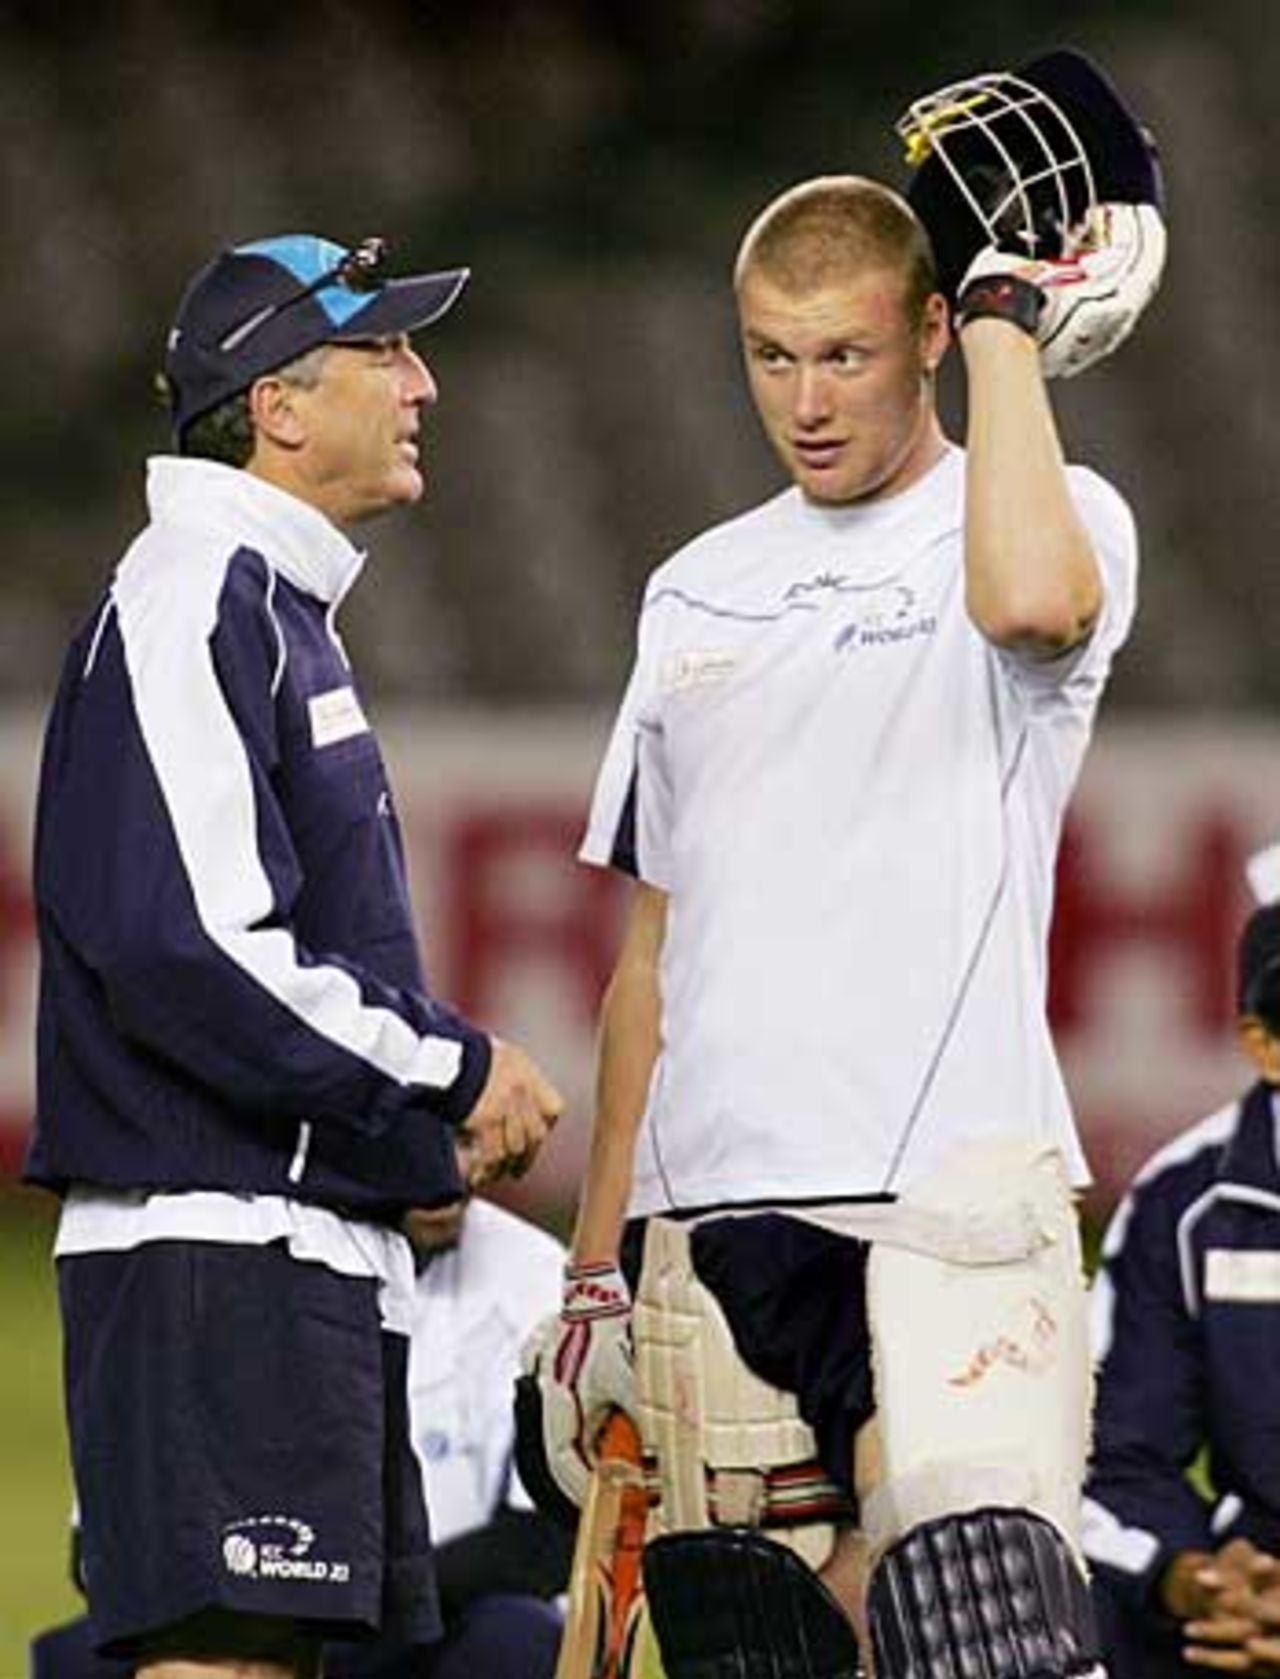 John Wright chats with Andrew Flintoff during a training session, Melbourne, October 4, 2005